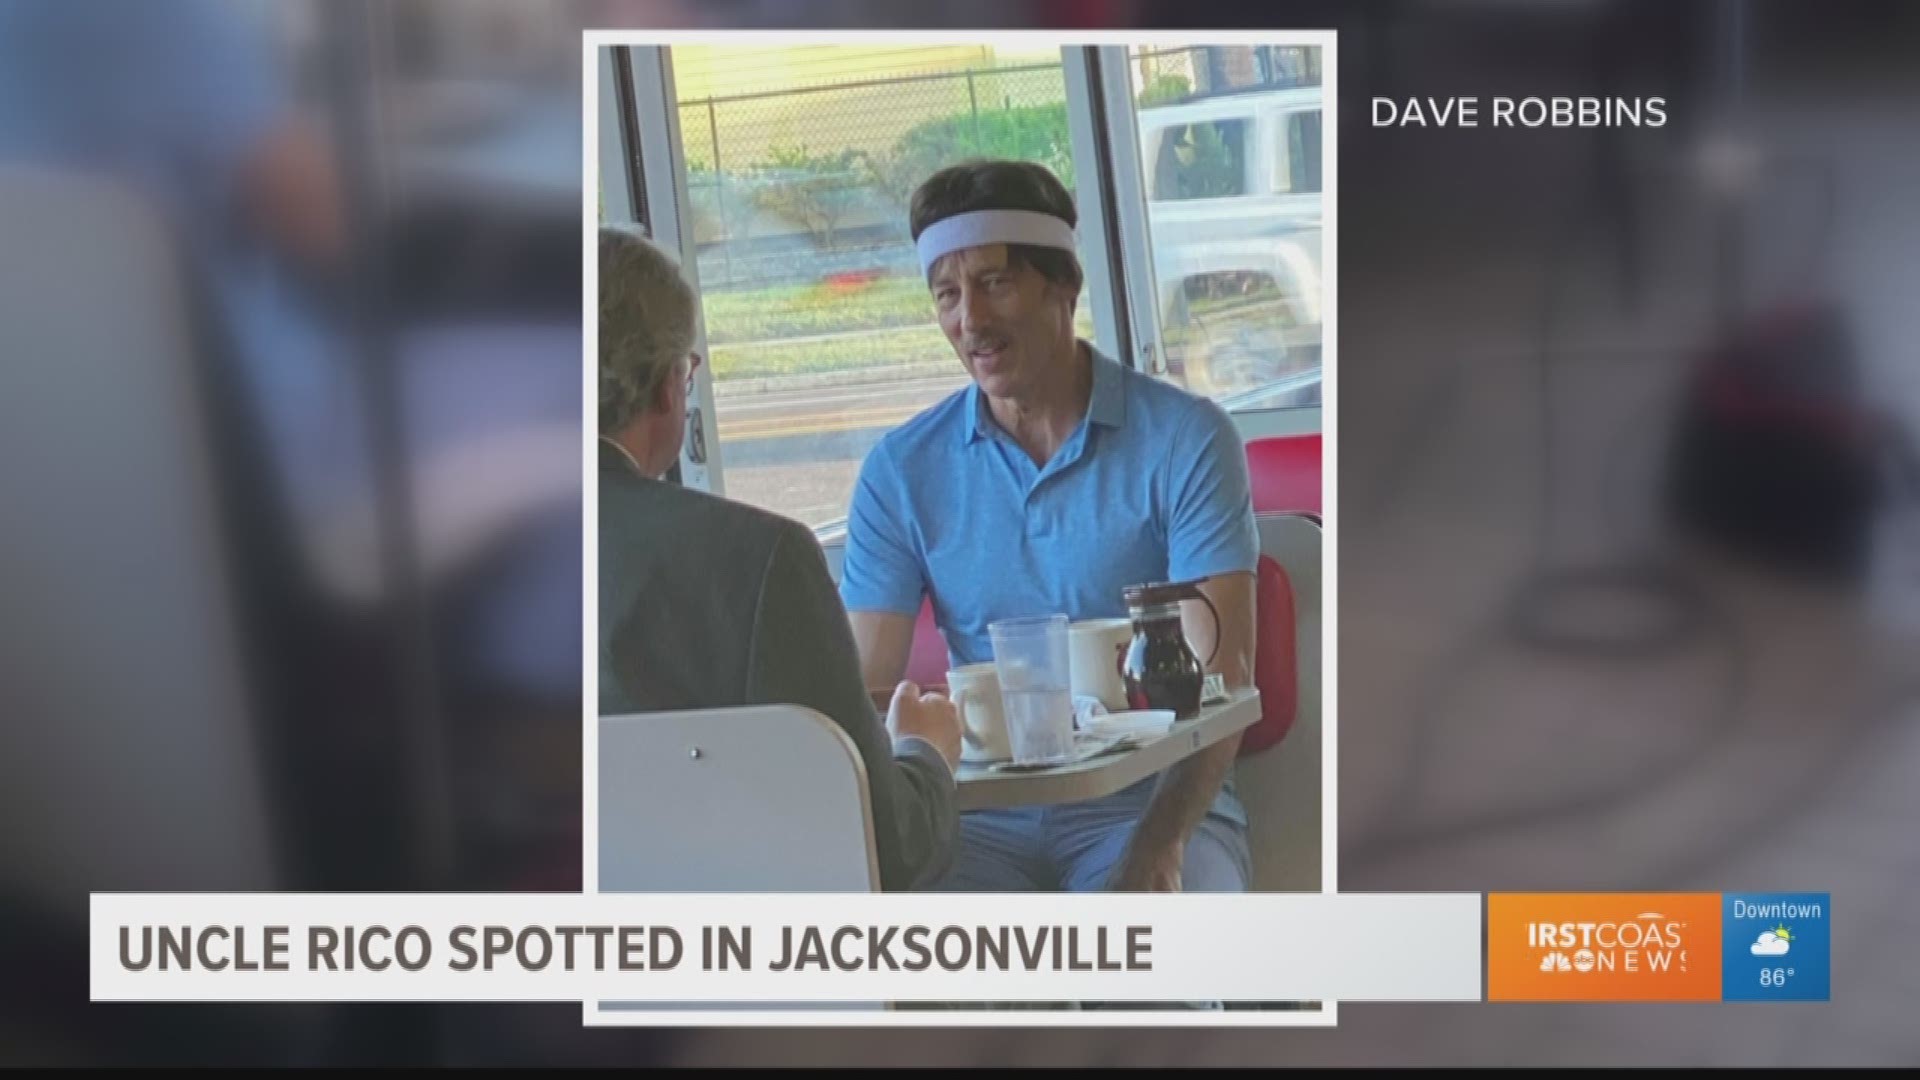 Jon Gries, the actor best known for portraying 'Uncle Rico' in Napoleon Dynamite, was seen by Dave Robbins as he was casually eating breakfast.